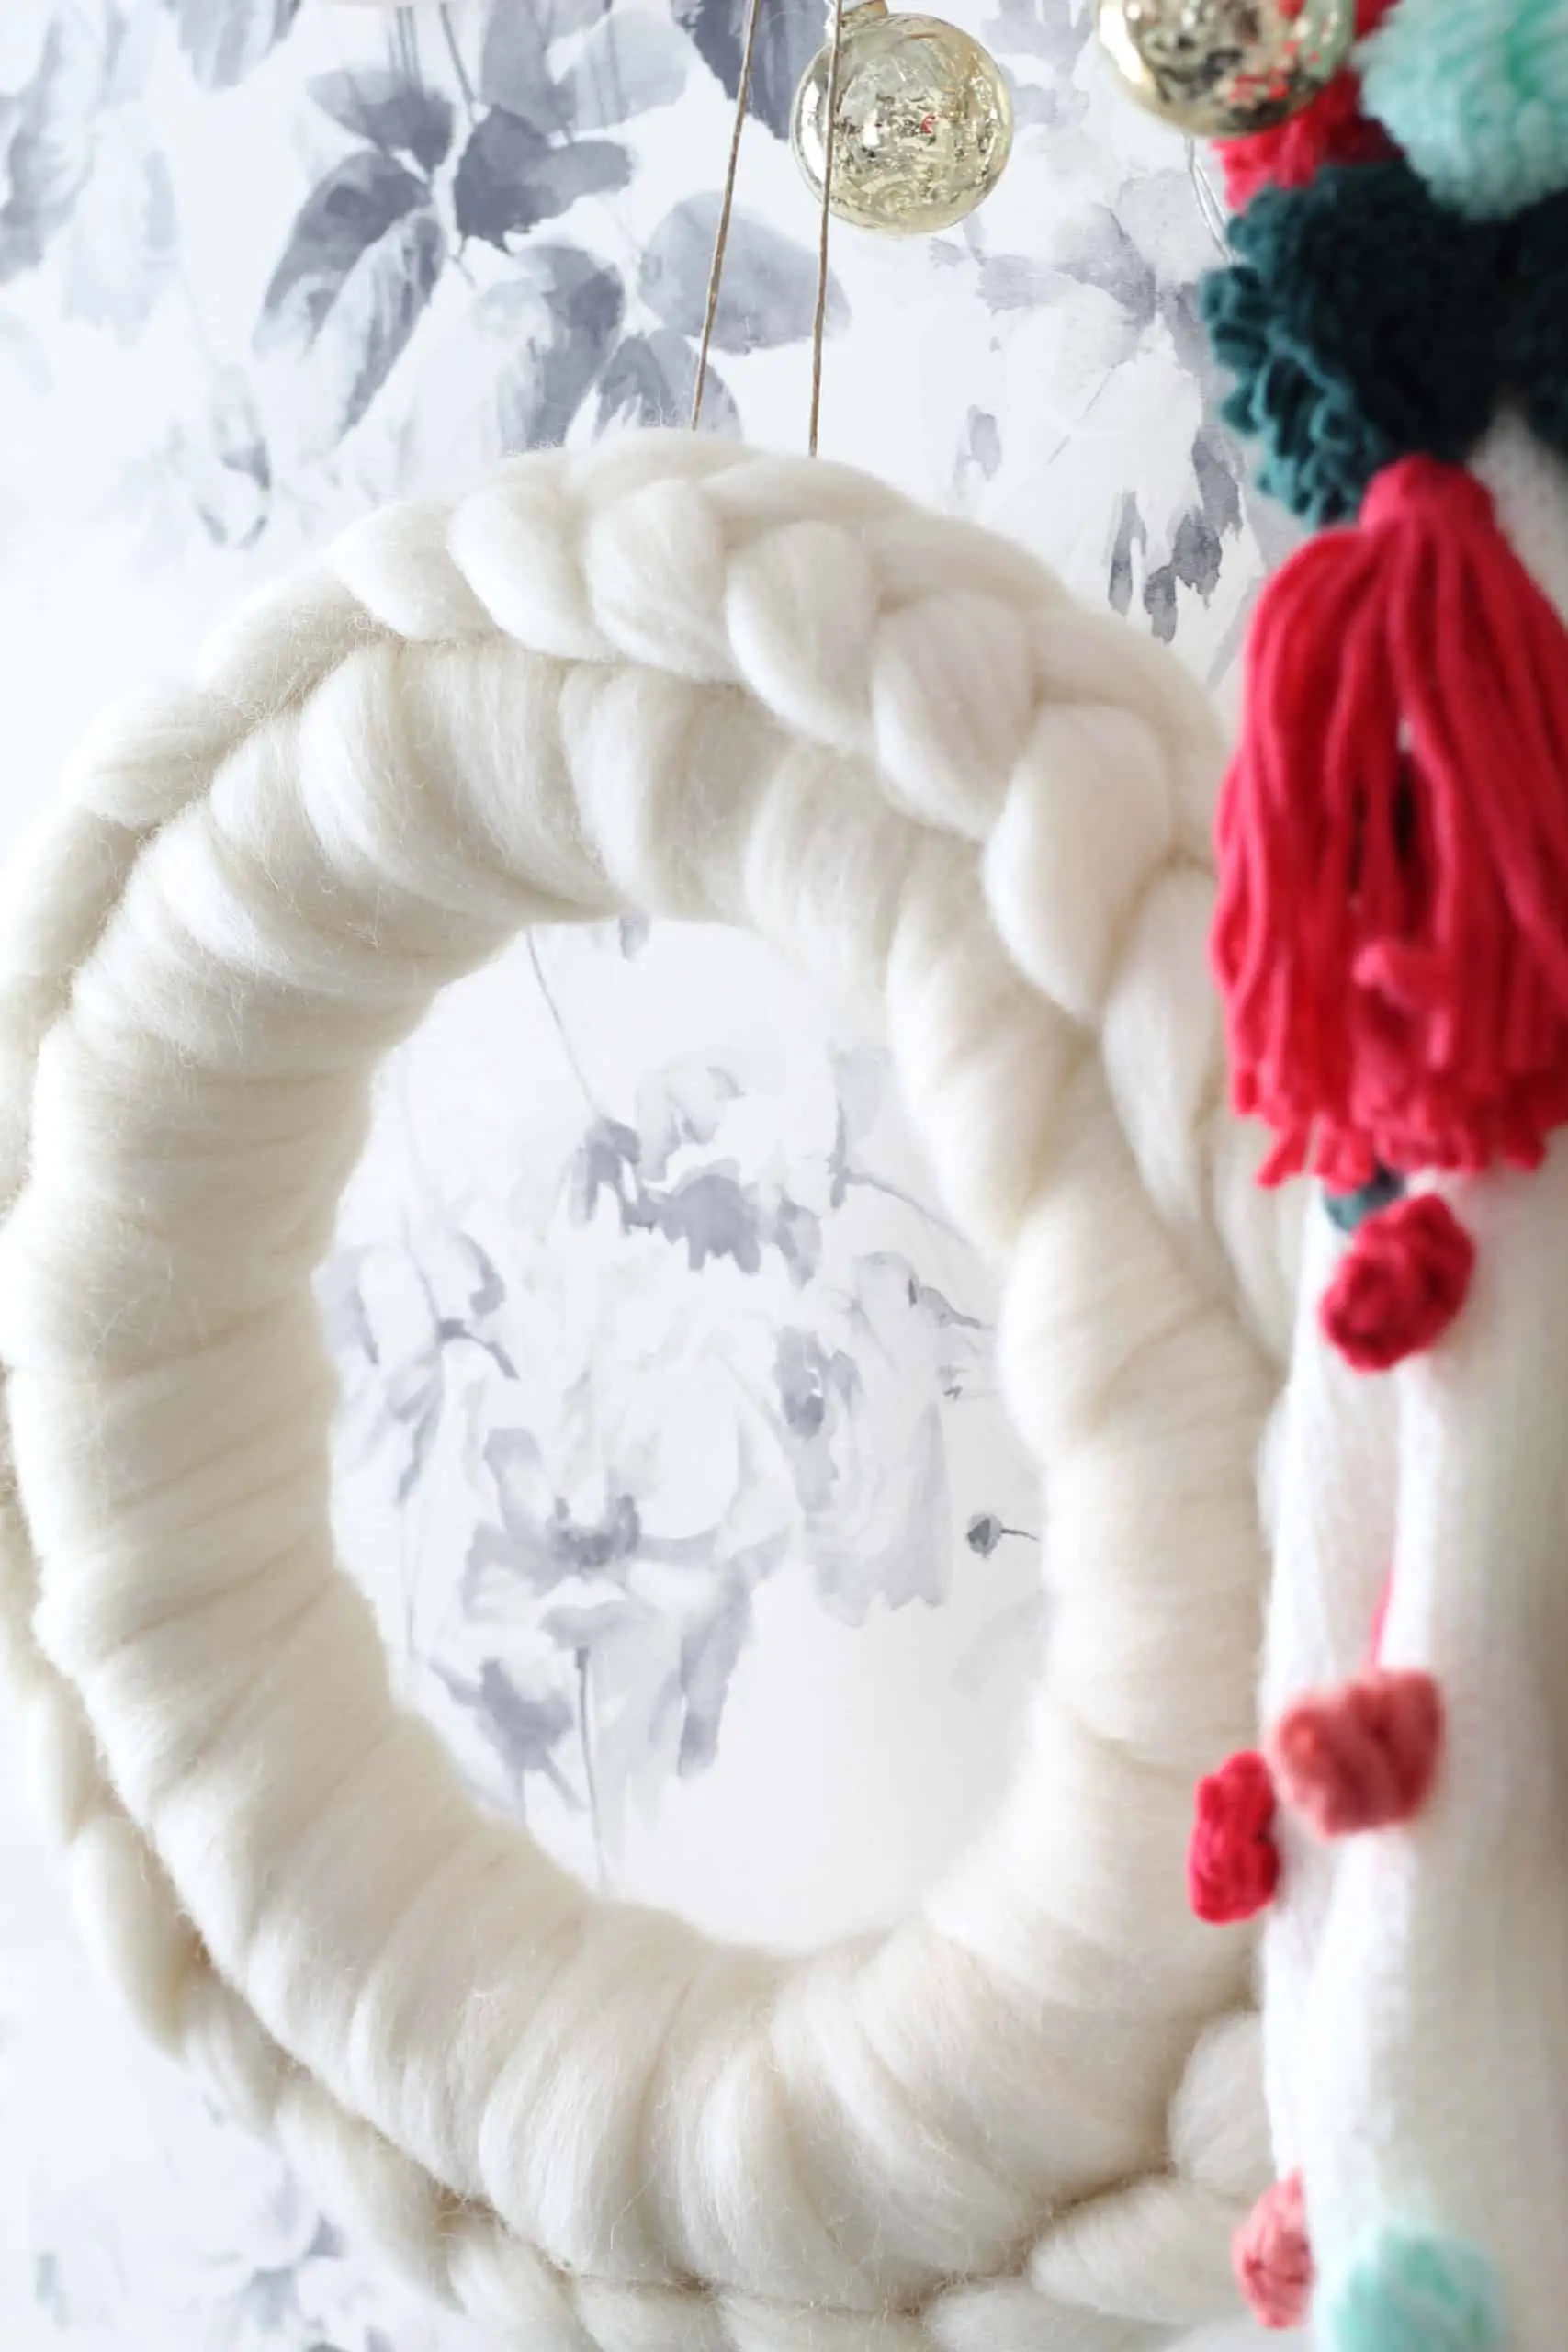 anthropologie white wool wreath, anthropologie christmas wreath, diy anthropologie wreath, anthropologie pom pom christmas stockings, smoky rose wallpaper by house of hackney